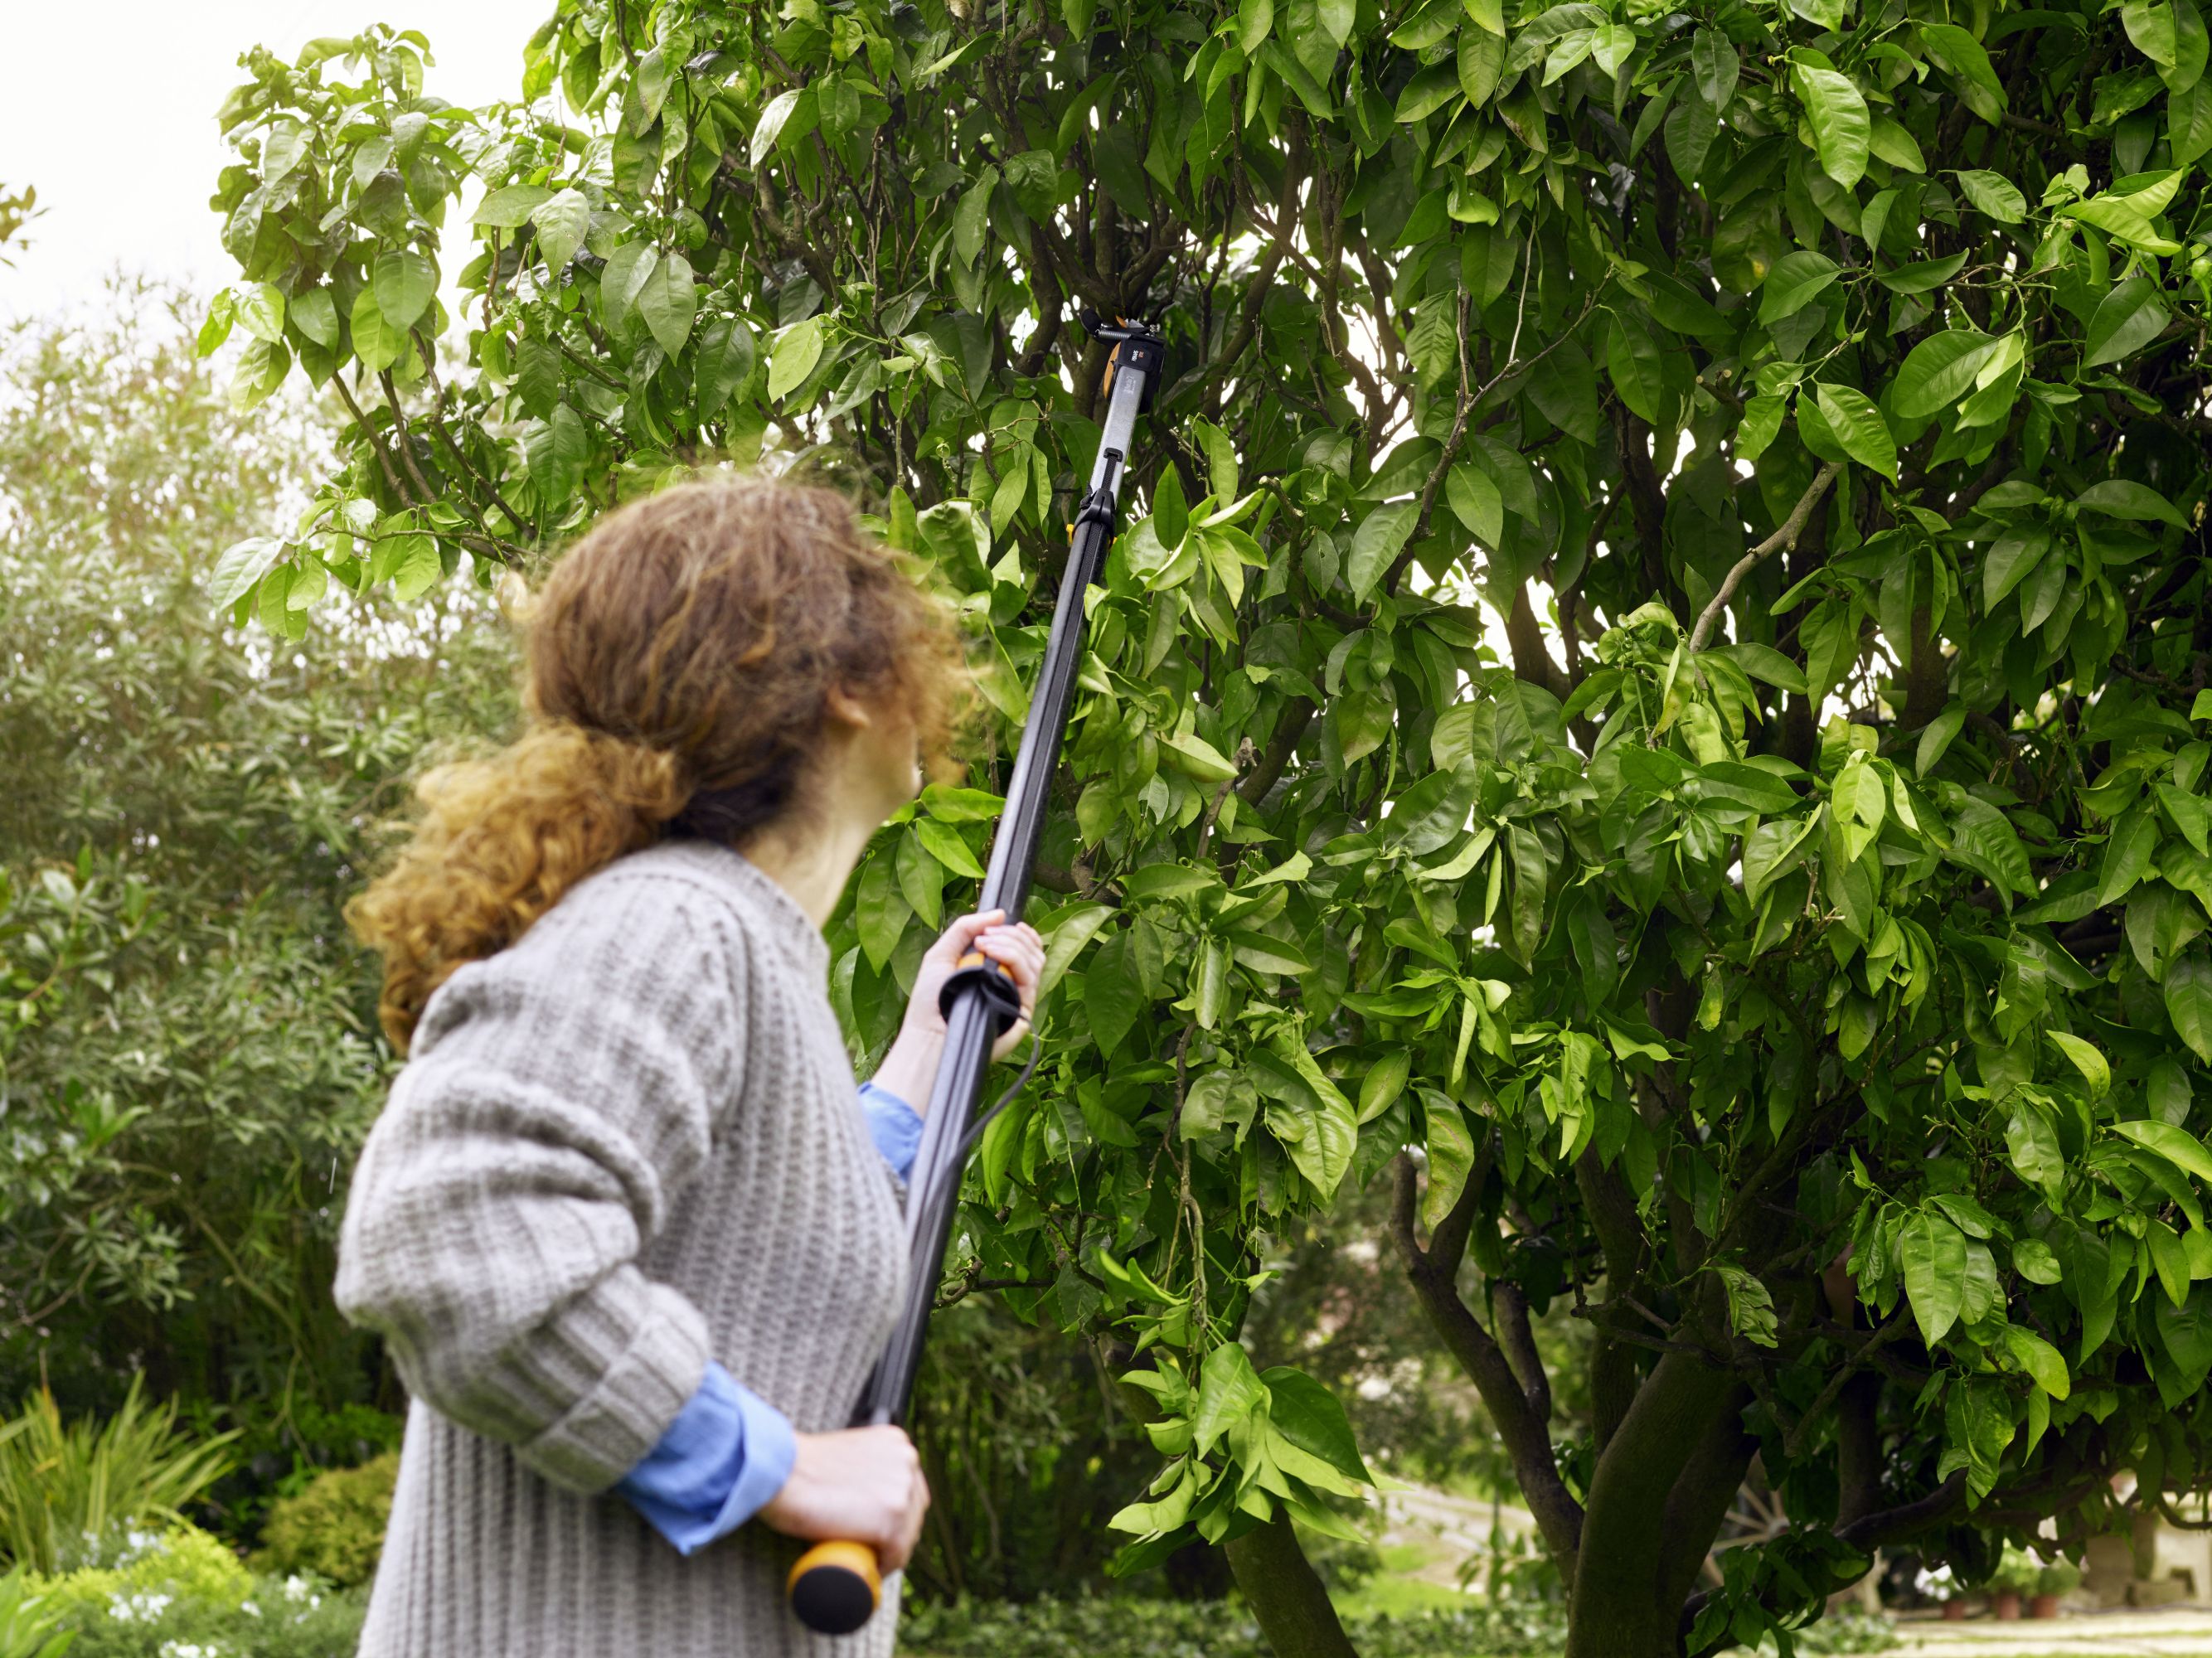 Tree pruning may require extendable poles. (Fiskars/PA)